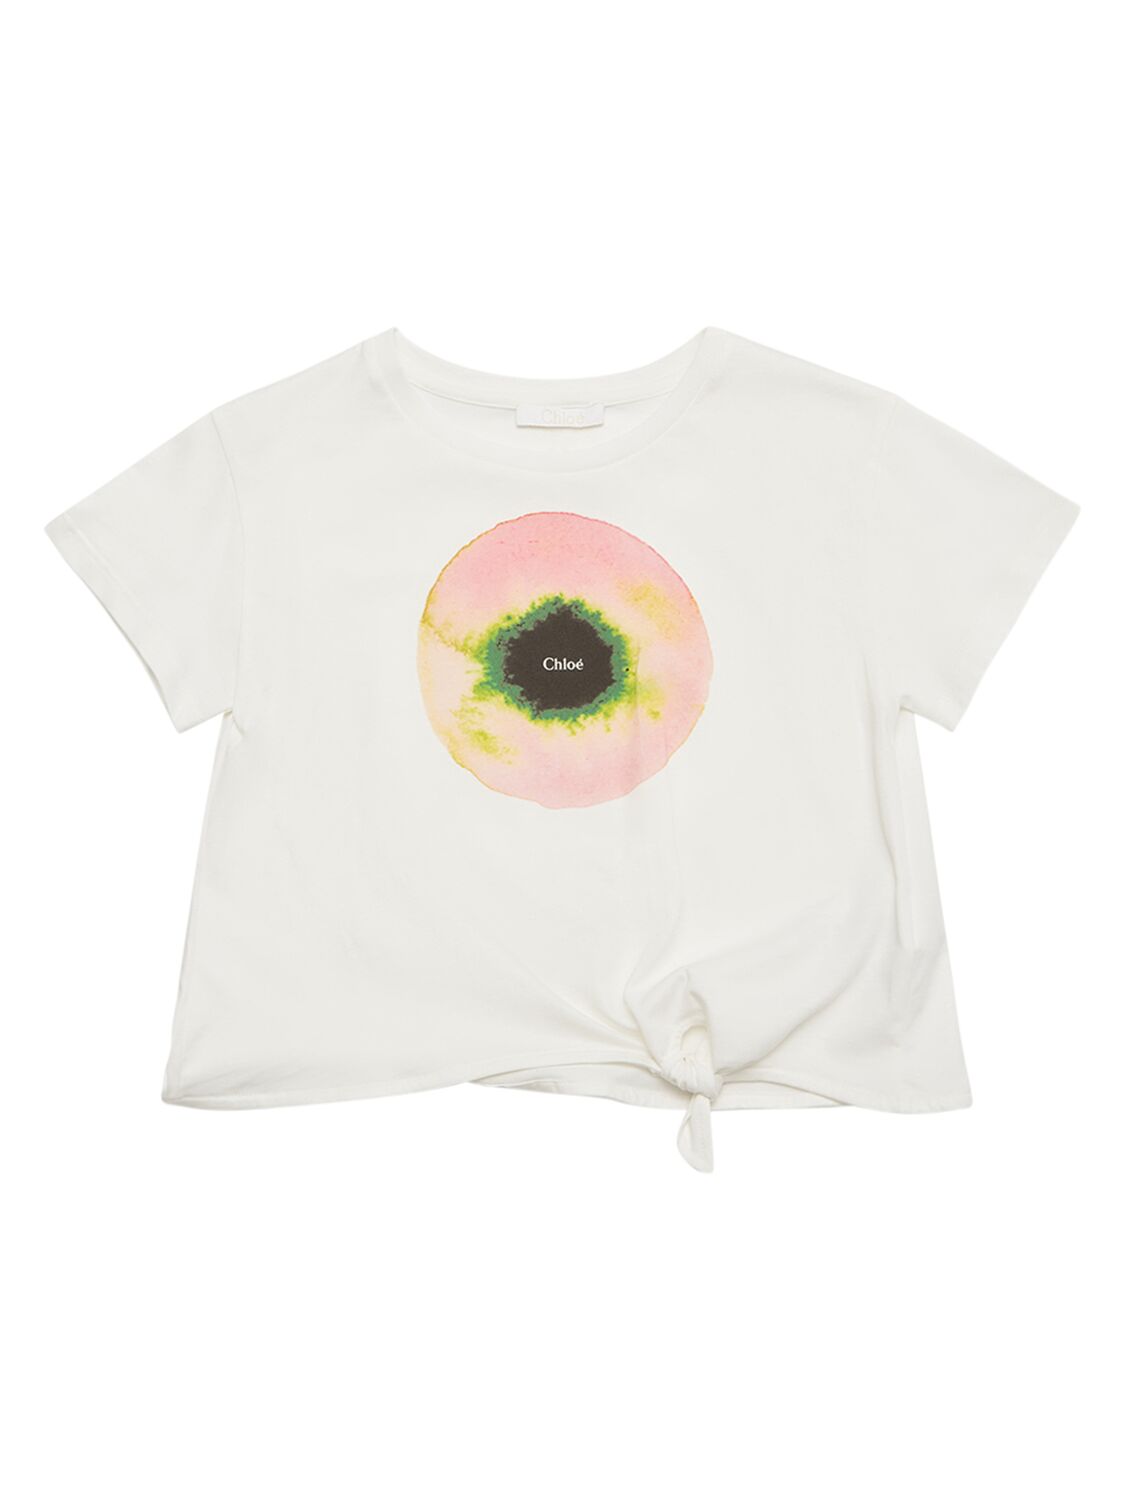 Chloé Kids' Printed Cotton Jersey T-shirt In Off-white